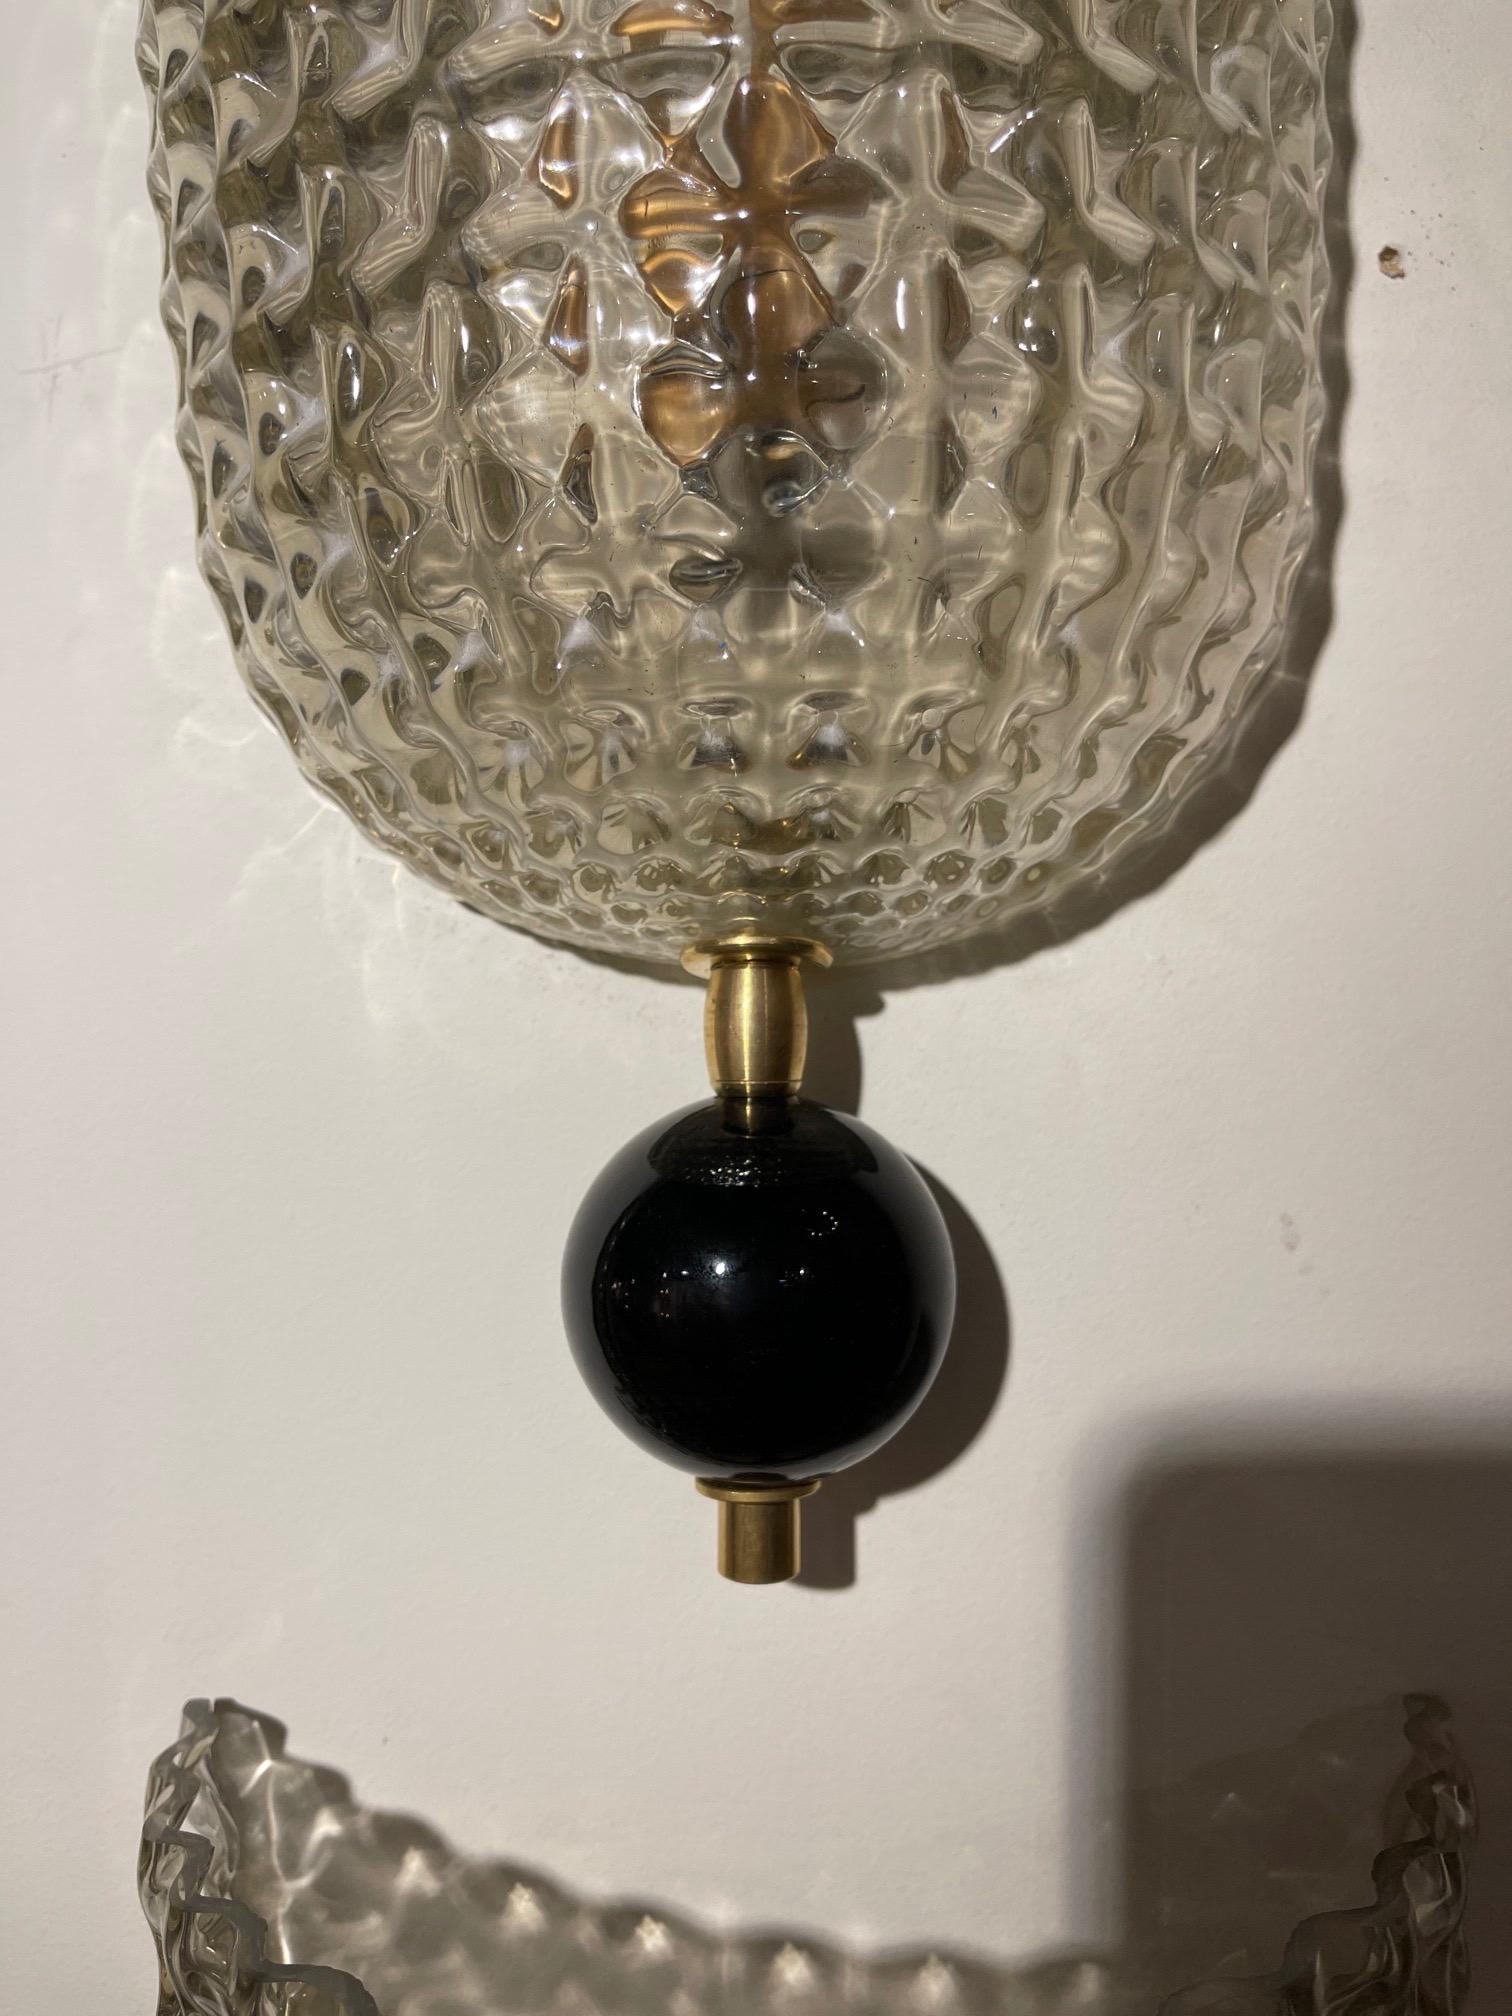 Set of 4 Modern Murano Glass Wall Sconces with Black Glass Ball Finials In Good Condition For Sale In Dallas, TX